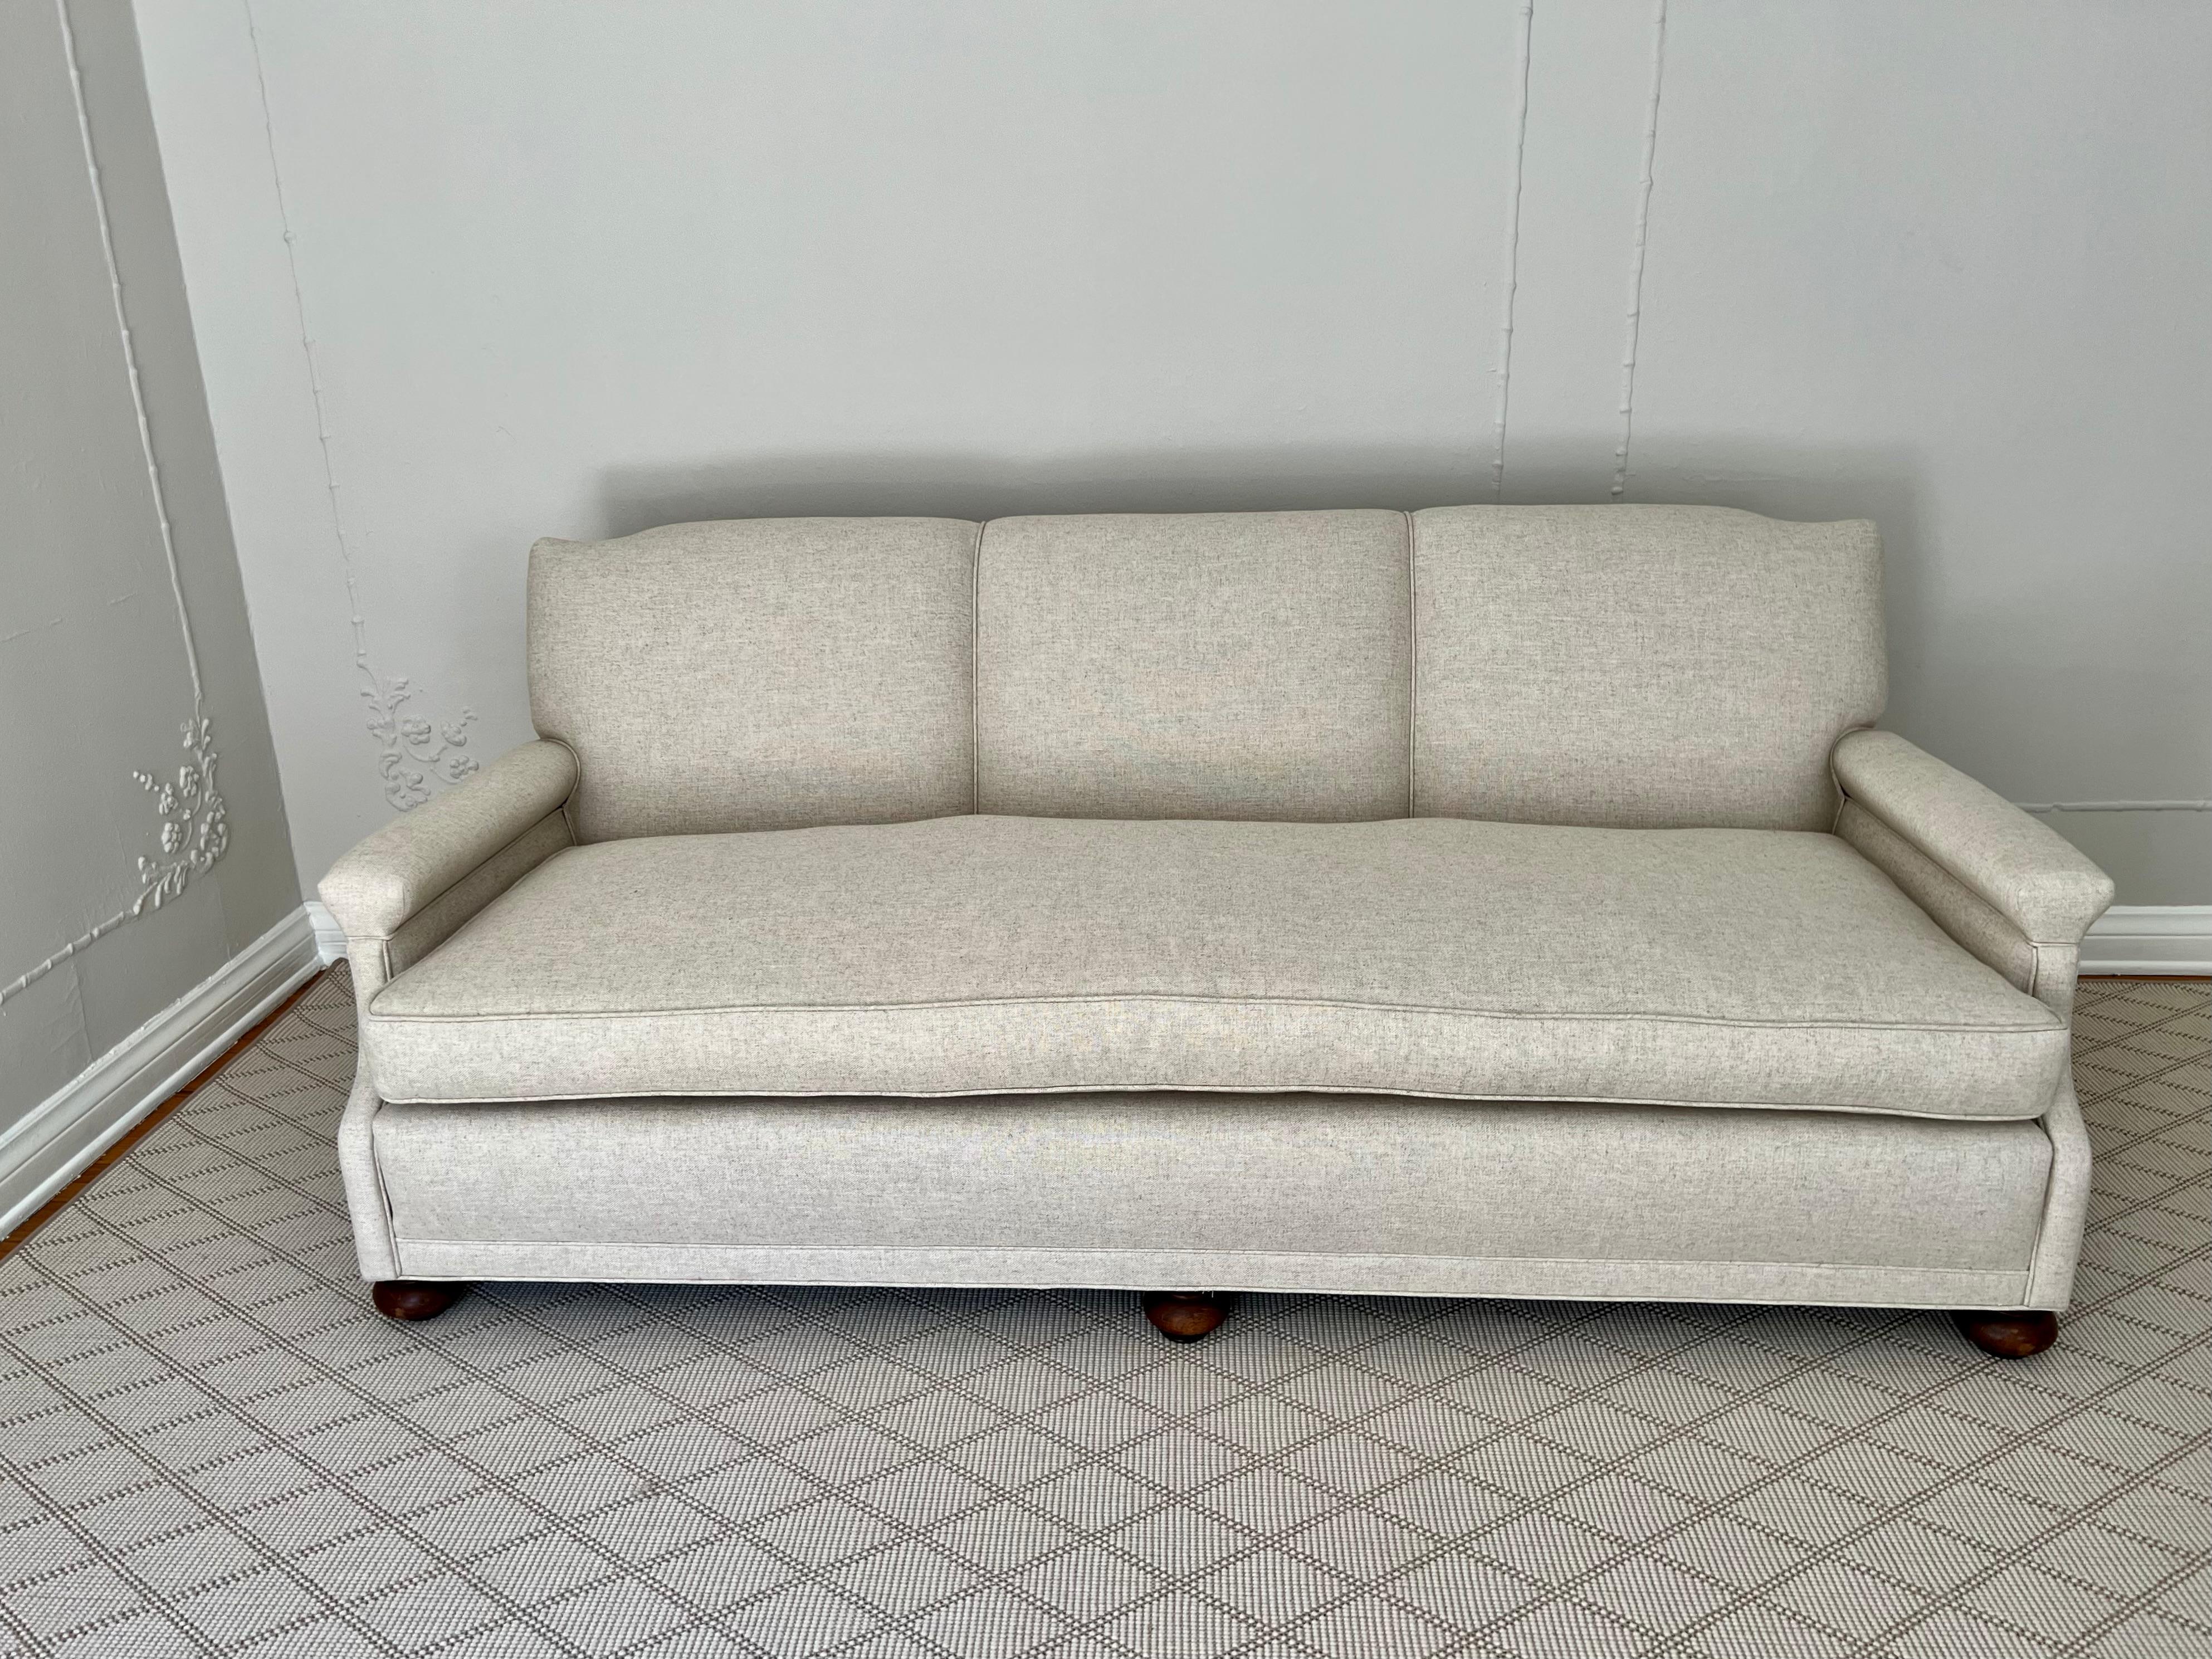 Newly upholstered sofa in neutral linen. This vintage sofa is very well built with hand tied springs - 

The newly upholstered  cushions are down filled and wrapped - a very nice piece with great construction and very durable. We did a neutral linen